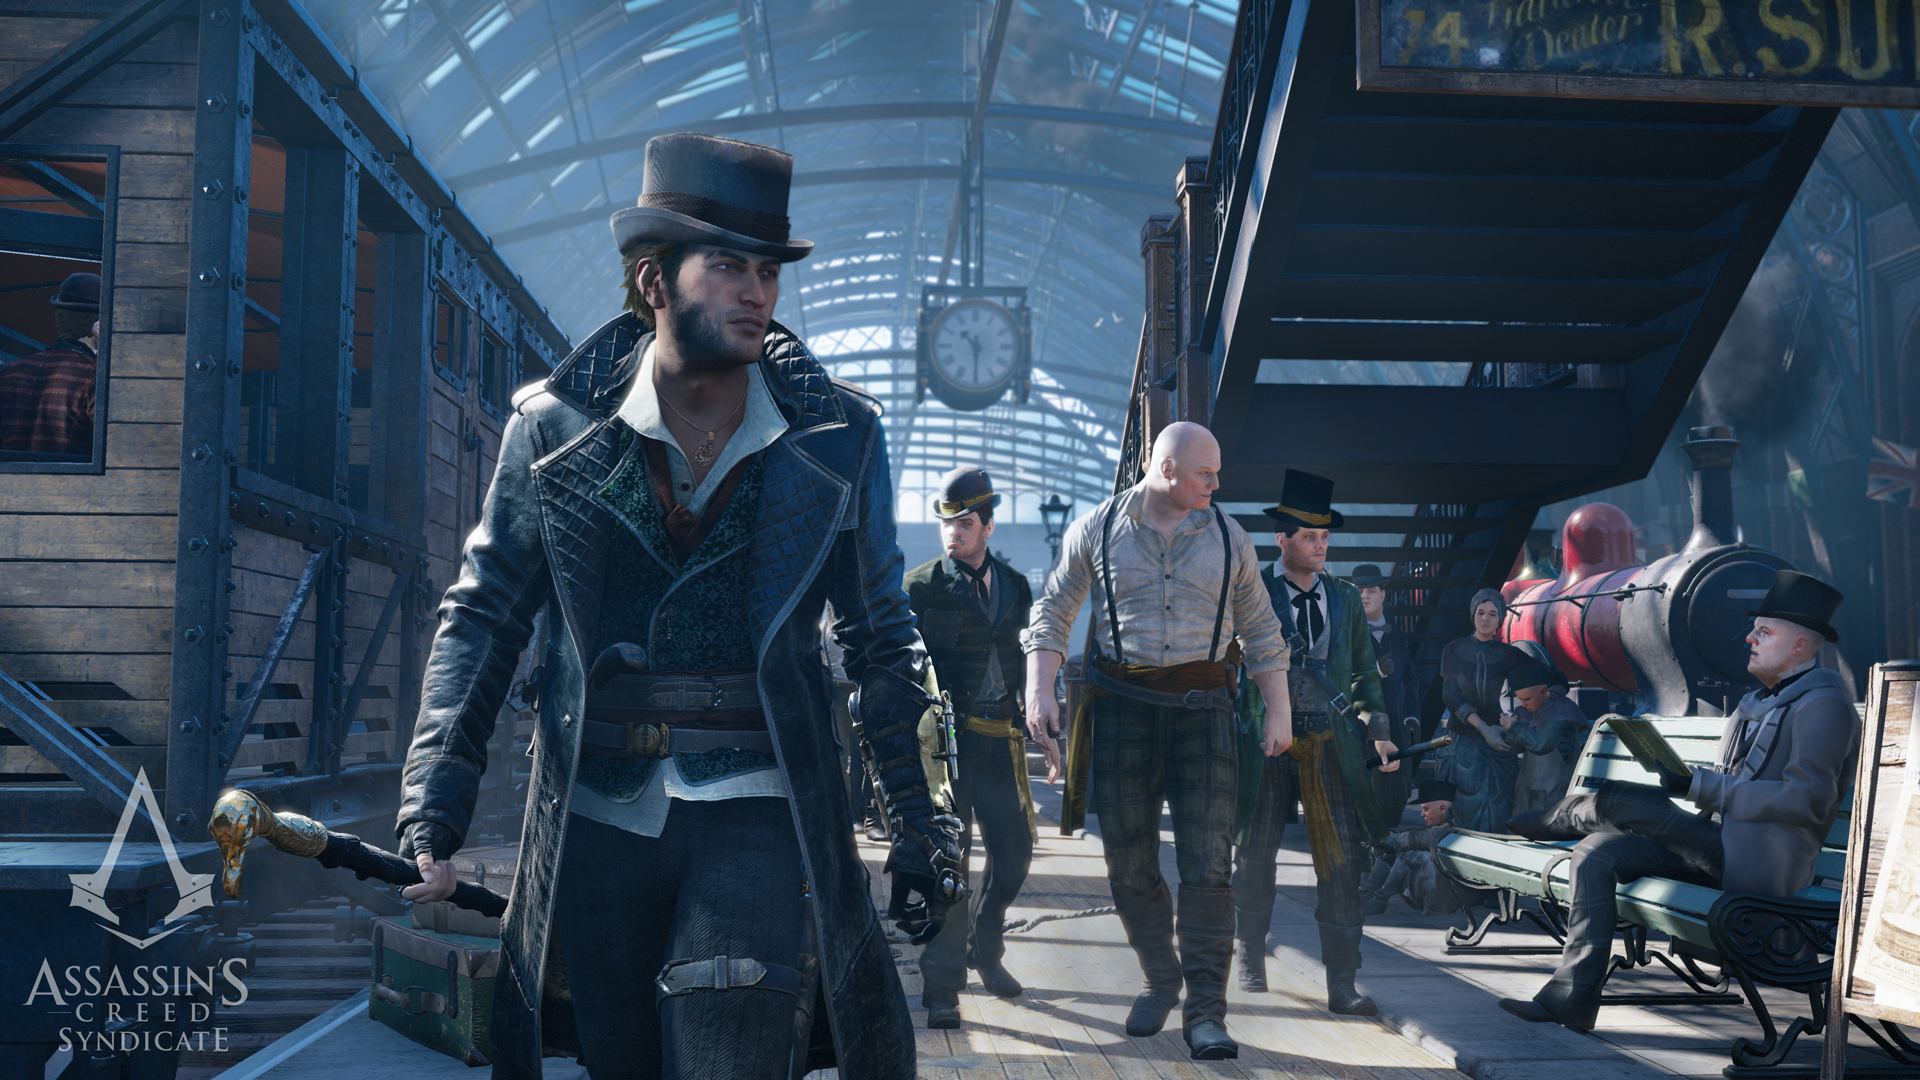 Assassin's Creed Syndicate image 1